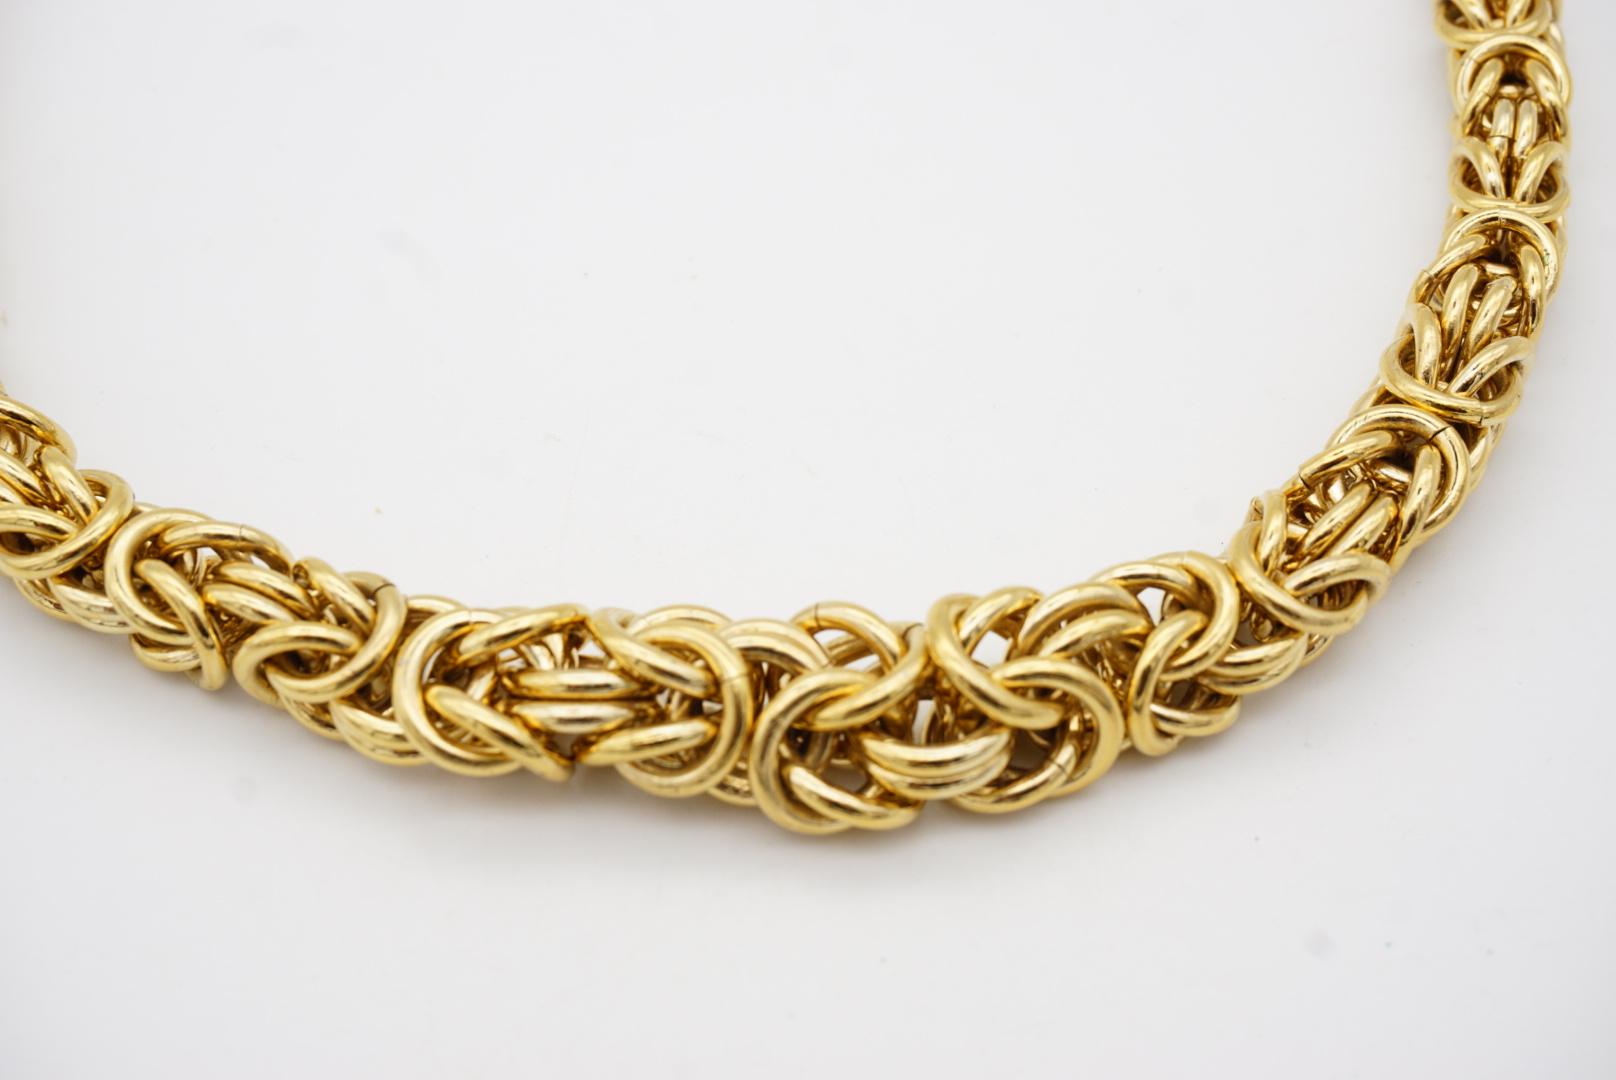 Christian Dior Vintage 1980s Byzantine Braid Royal Mesh Knot Link Rope Necklace For Sale 6